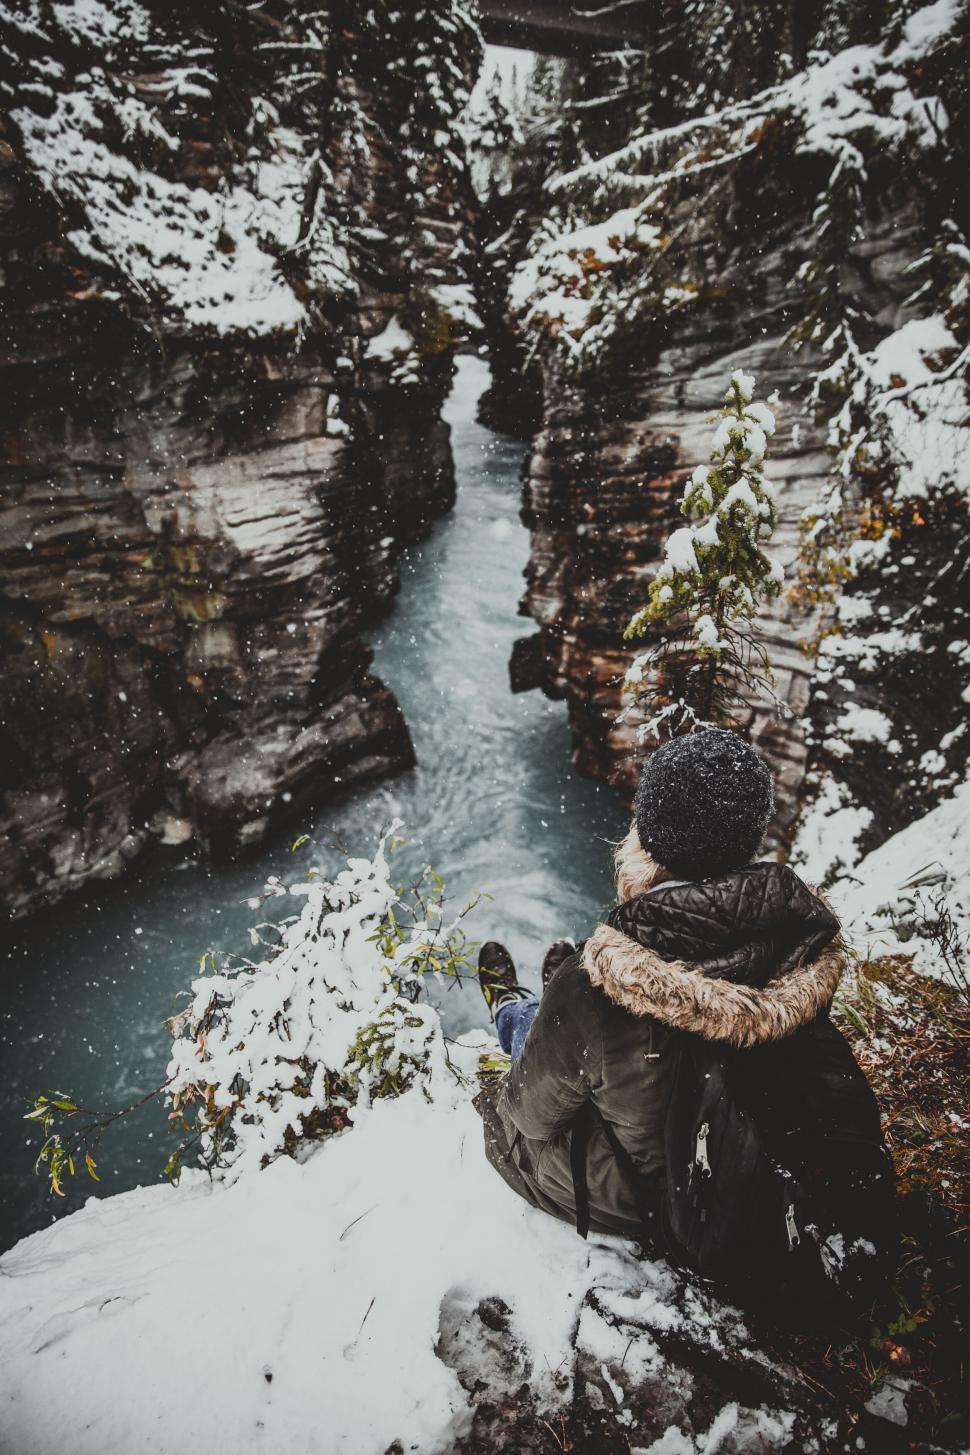 Free Image of Person overlooking a snowy canyon river 